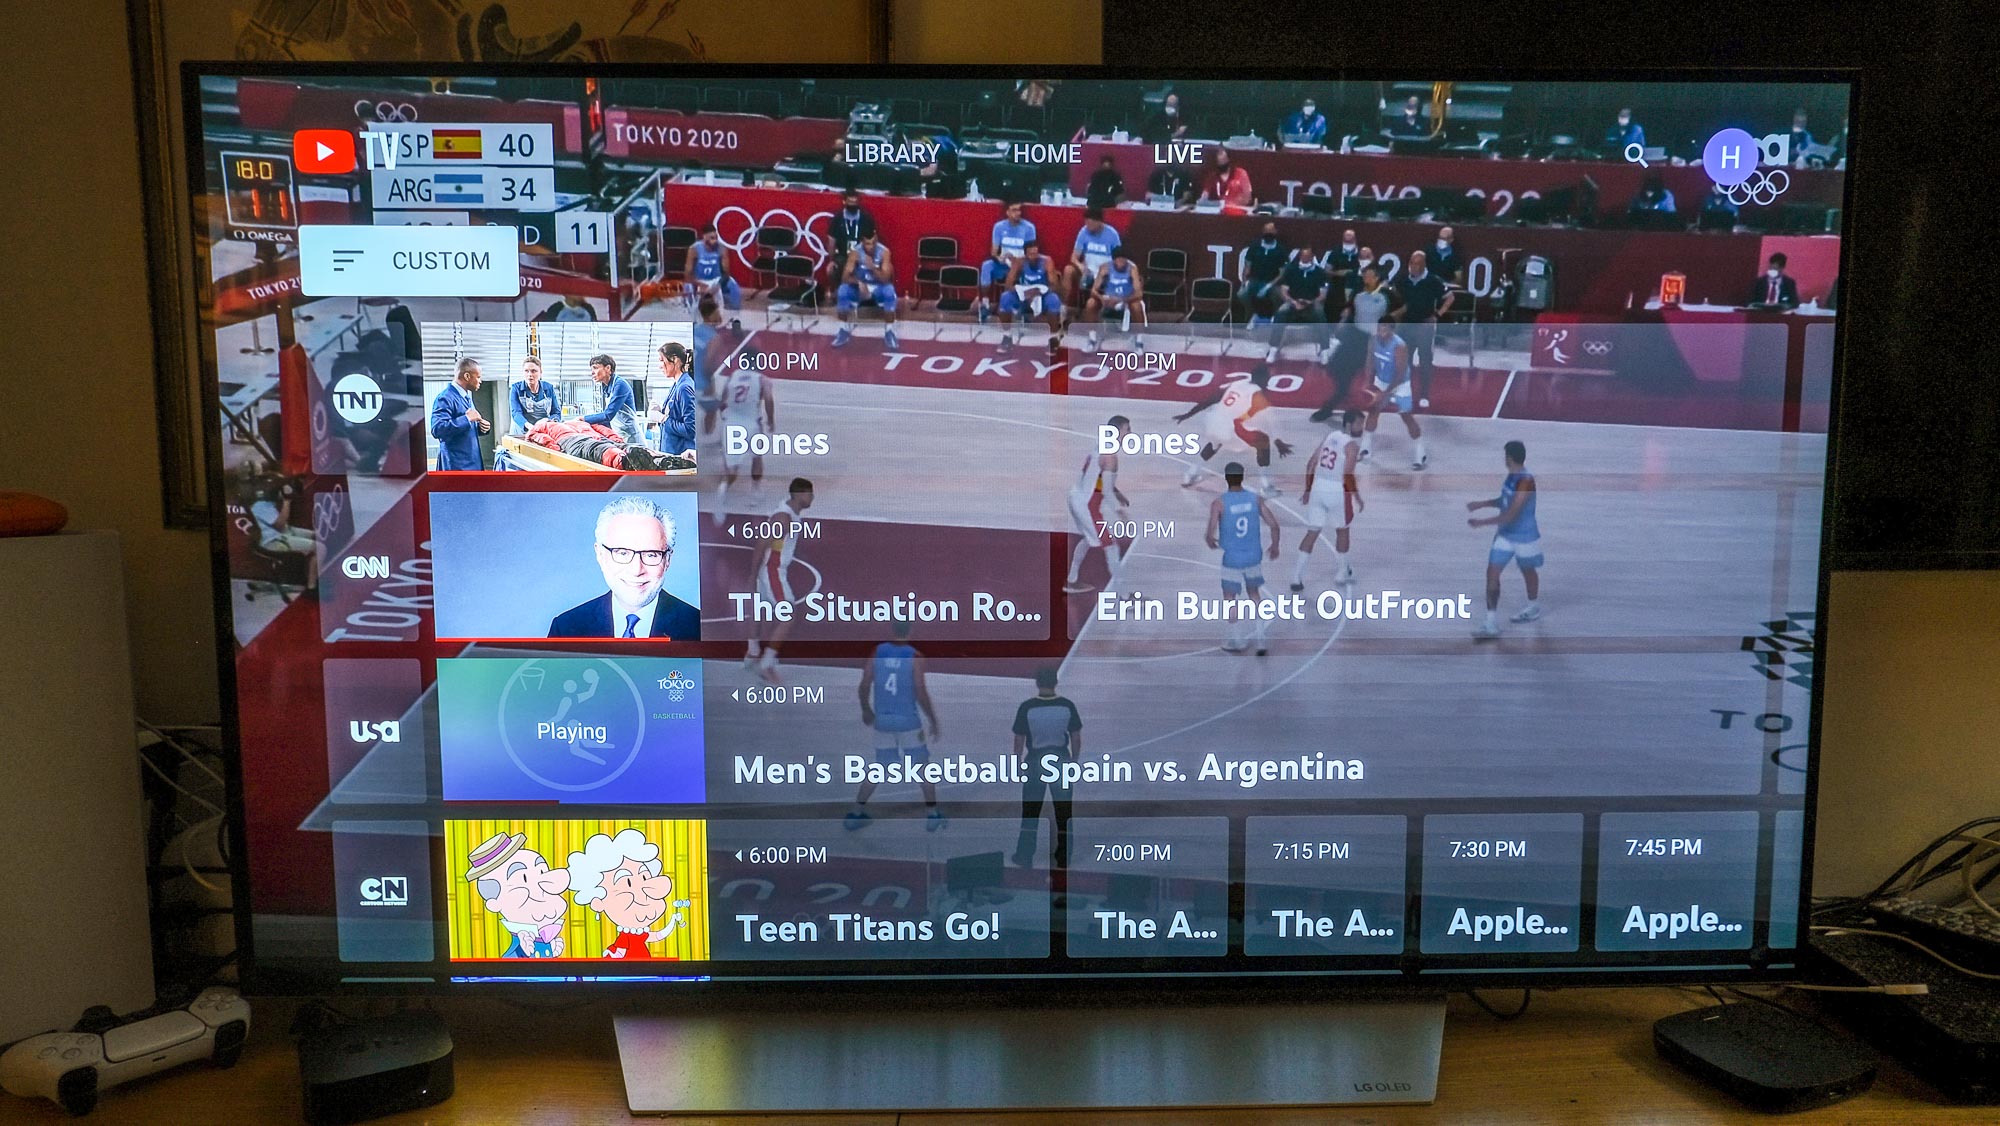 YouTube TV open to the channel grid overlaid over a basketball game